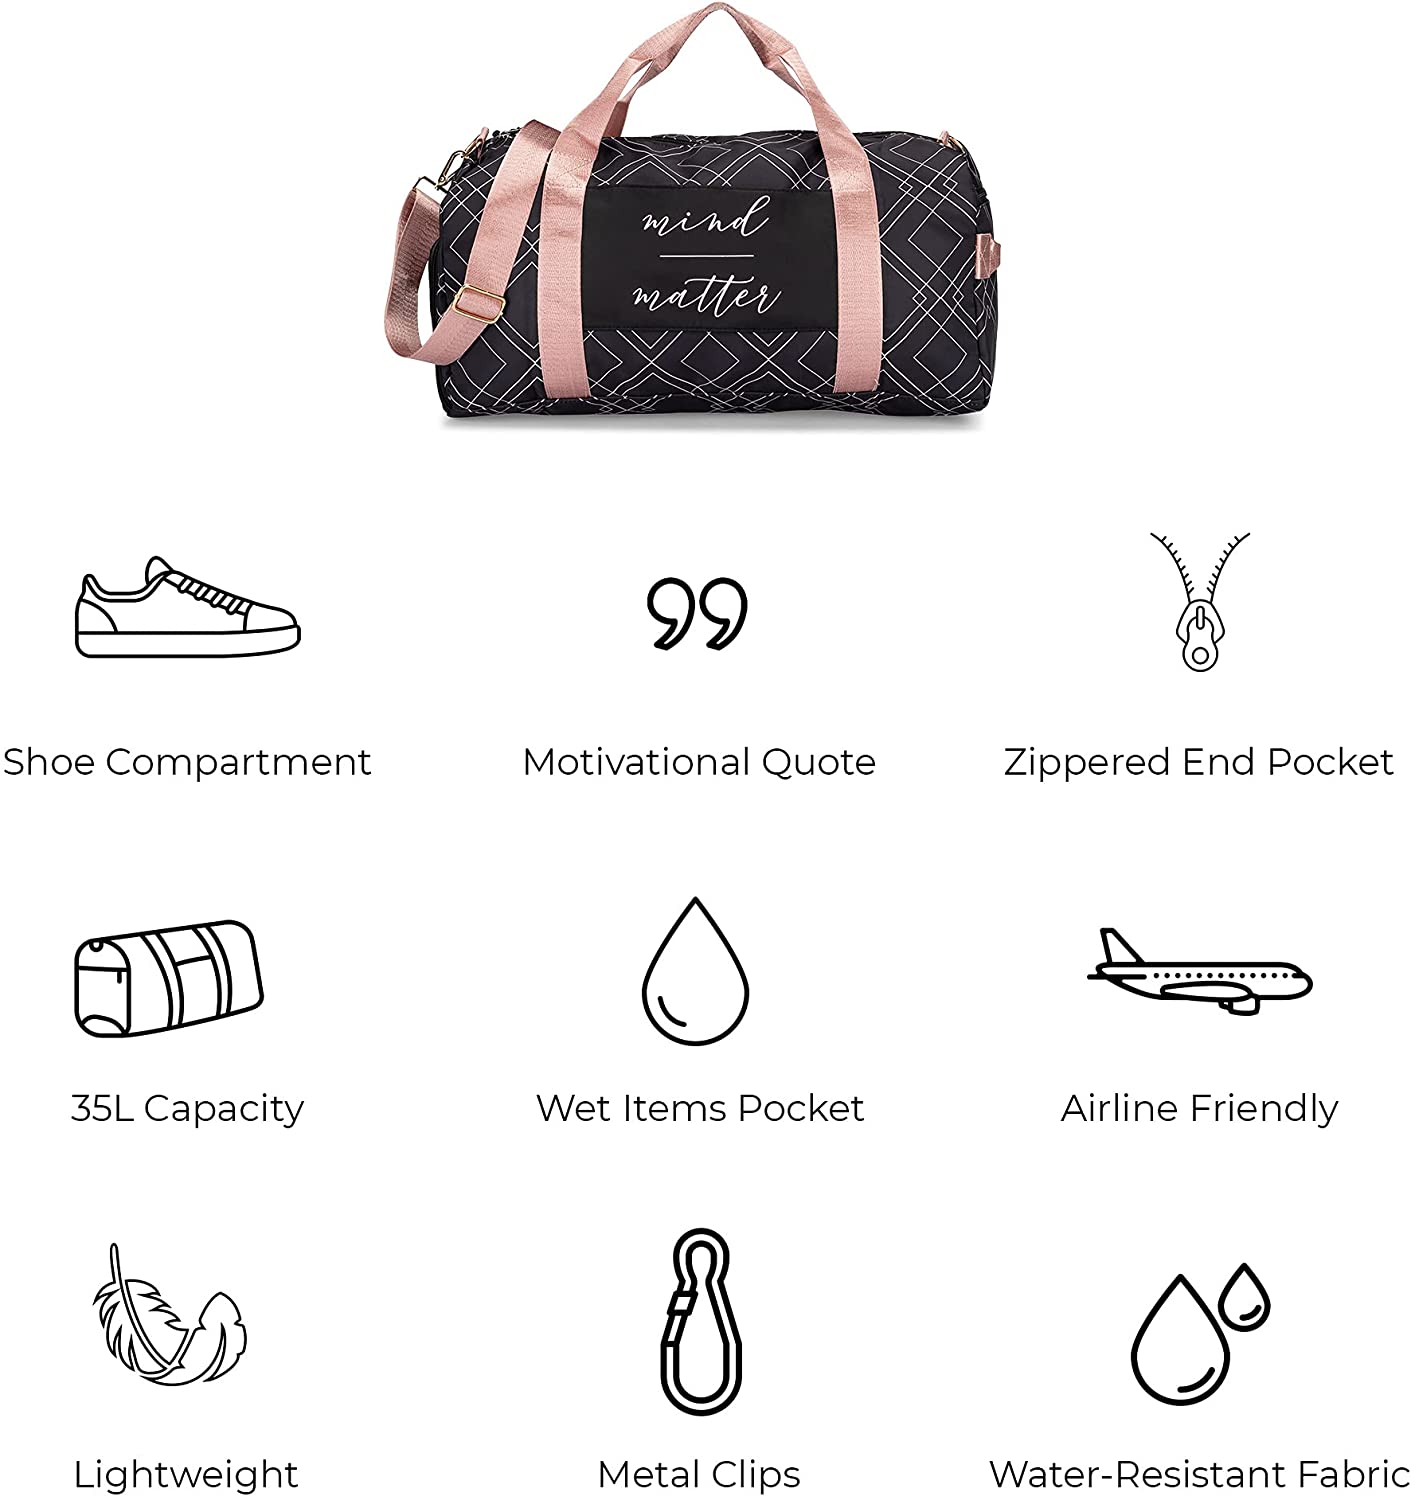 Bag for Women with Shoe Compartment and Wet Pocket | Lightweight Gym Duffle with Motivational Quote and Graphic Designs | Great for Working Out, Travel, and Overnights | Black/Rose - Diamond